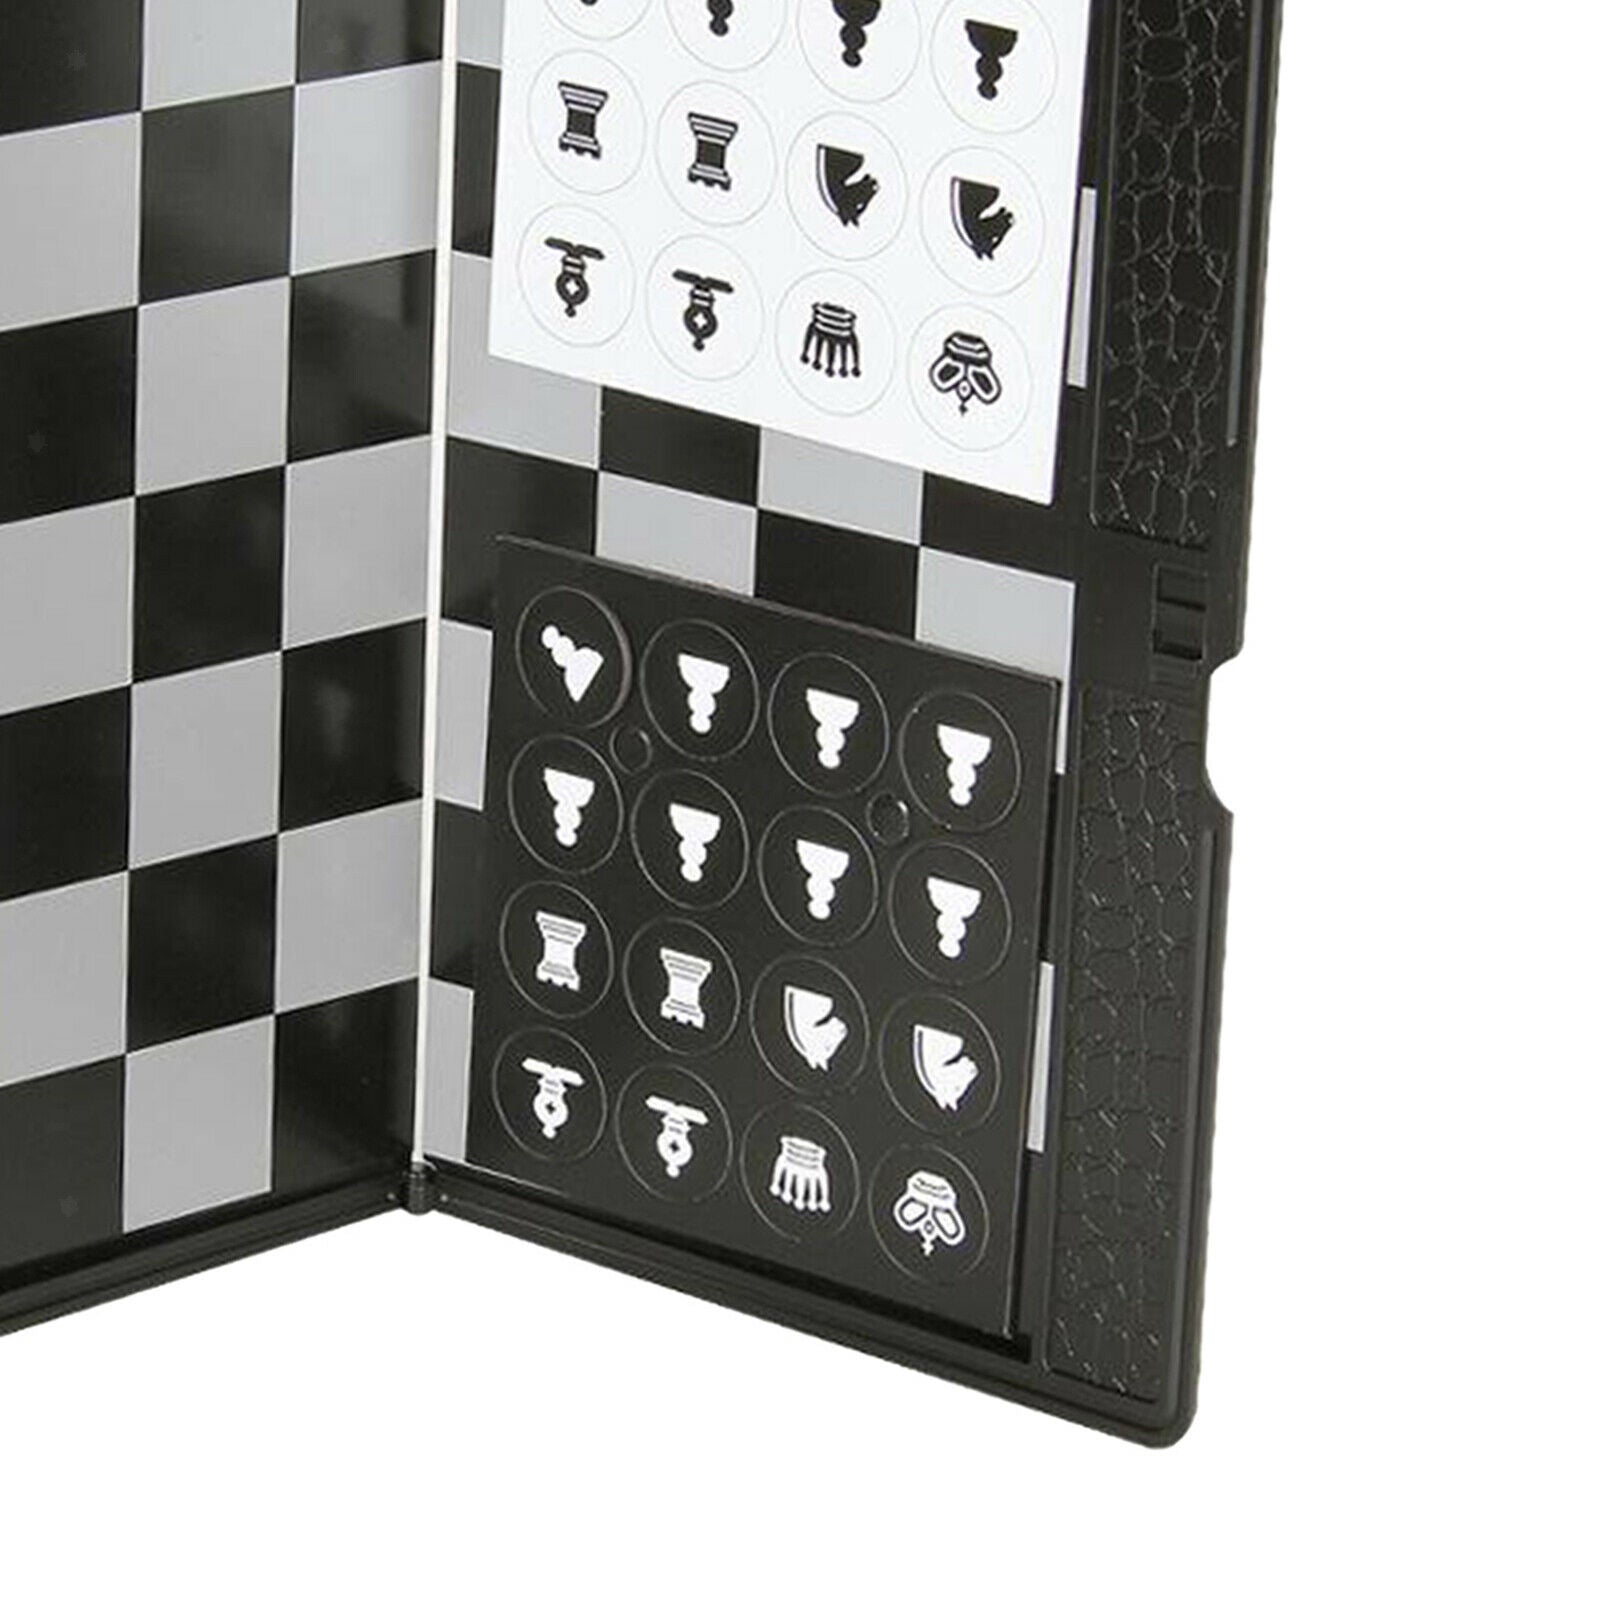 Mini Magnetic Chess Set Wallet Chess Board Game for Camping Family Game